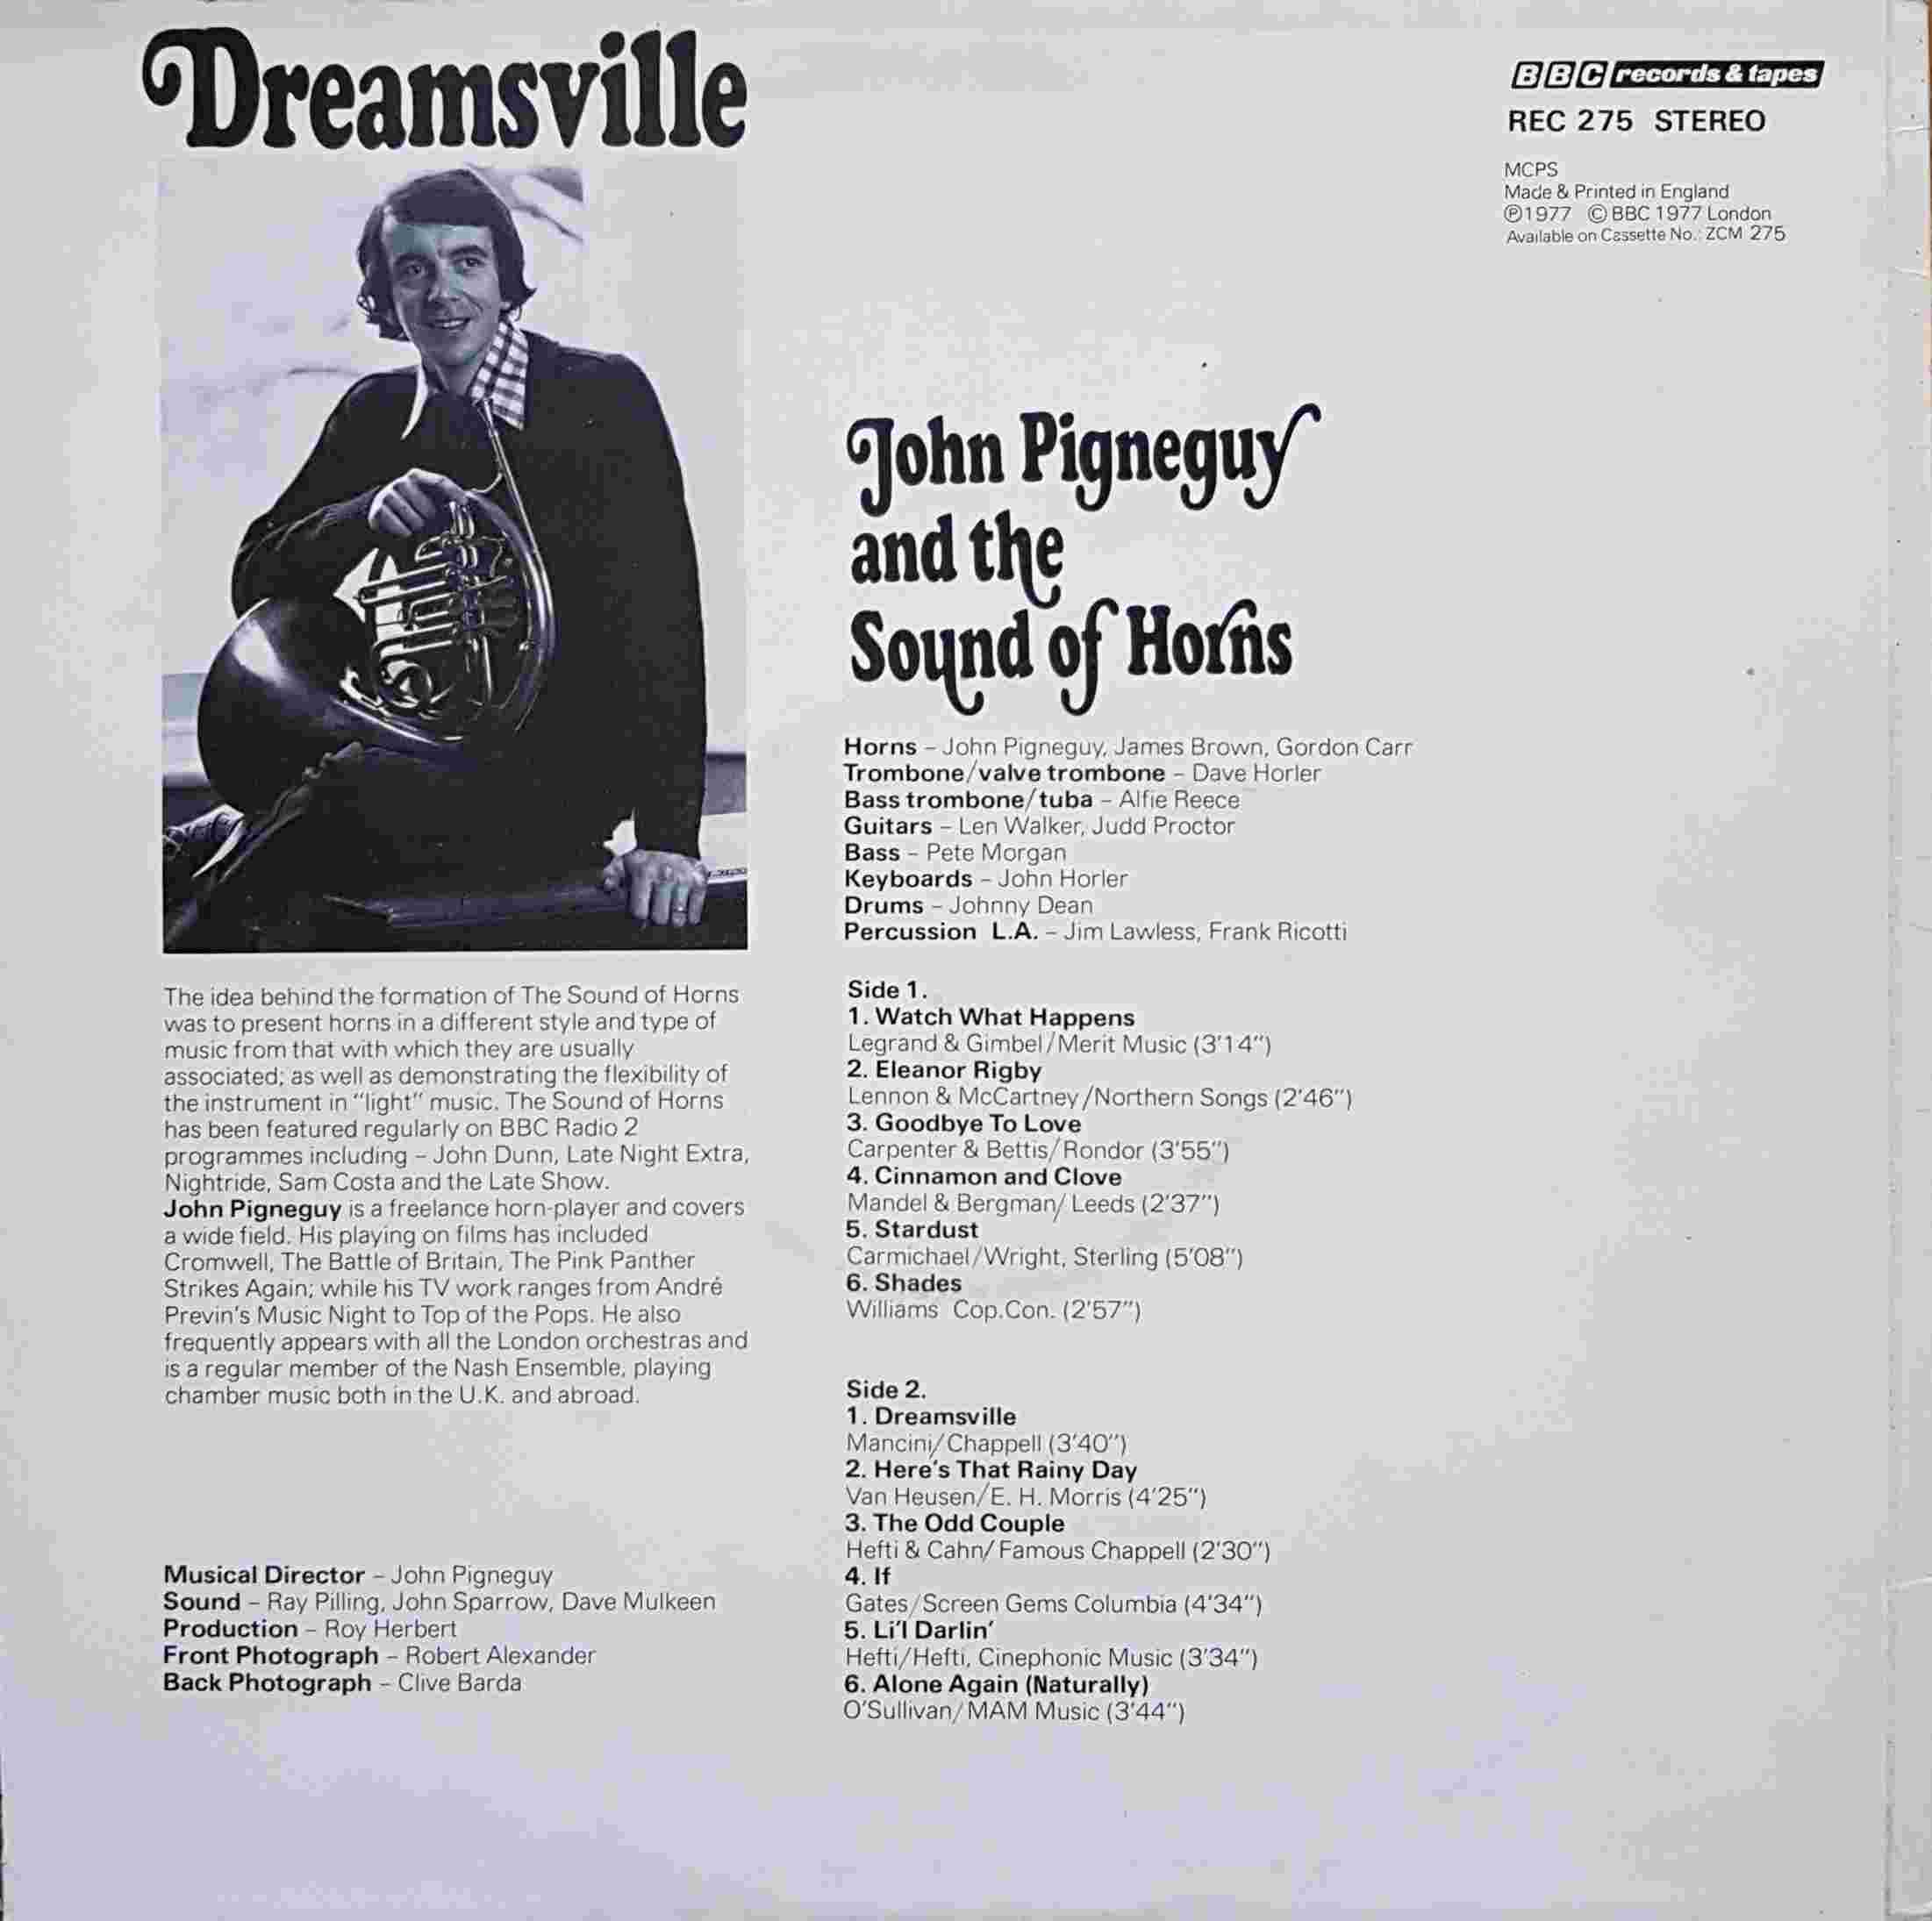 Picture of REC 275 Dreamsville by artist John Pigneguy and the sound of horns  from the BBC records and Tapes library